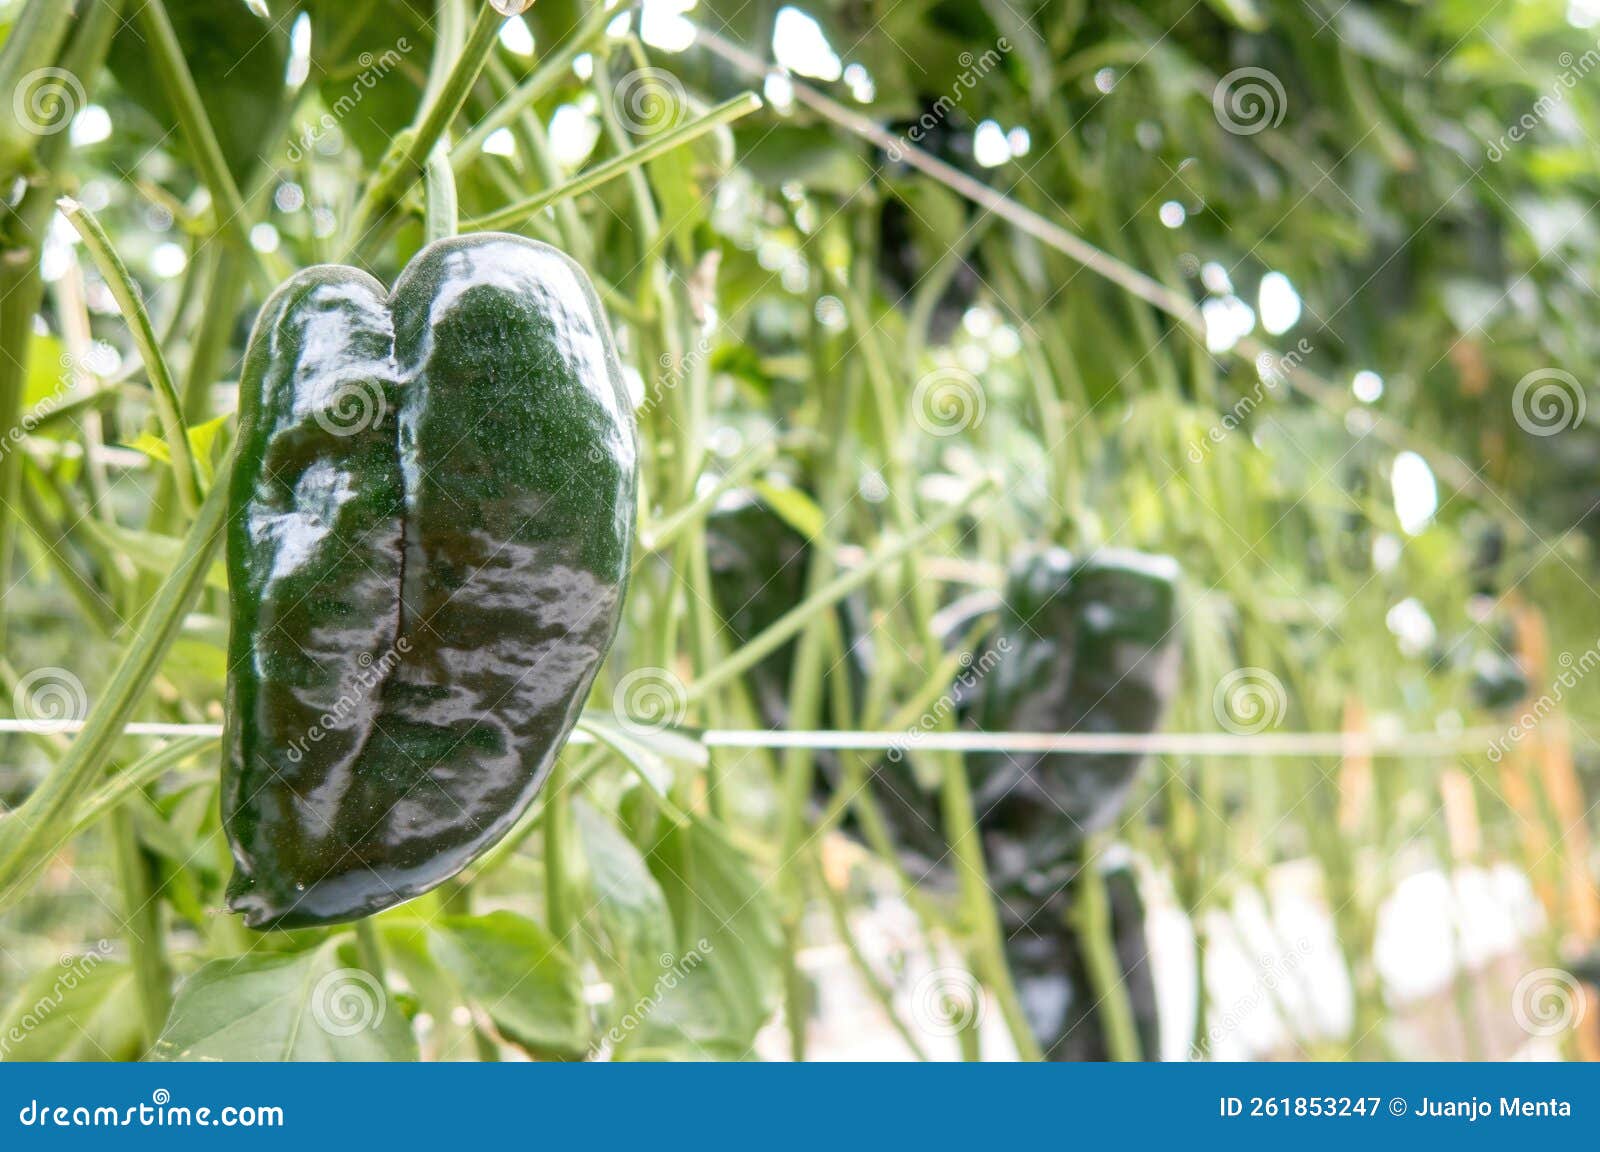 poblano peppers growing in a greenhouse